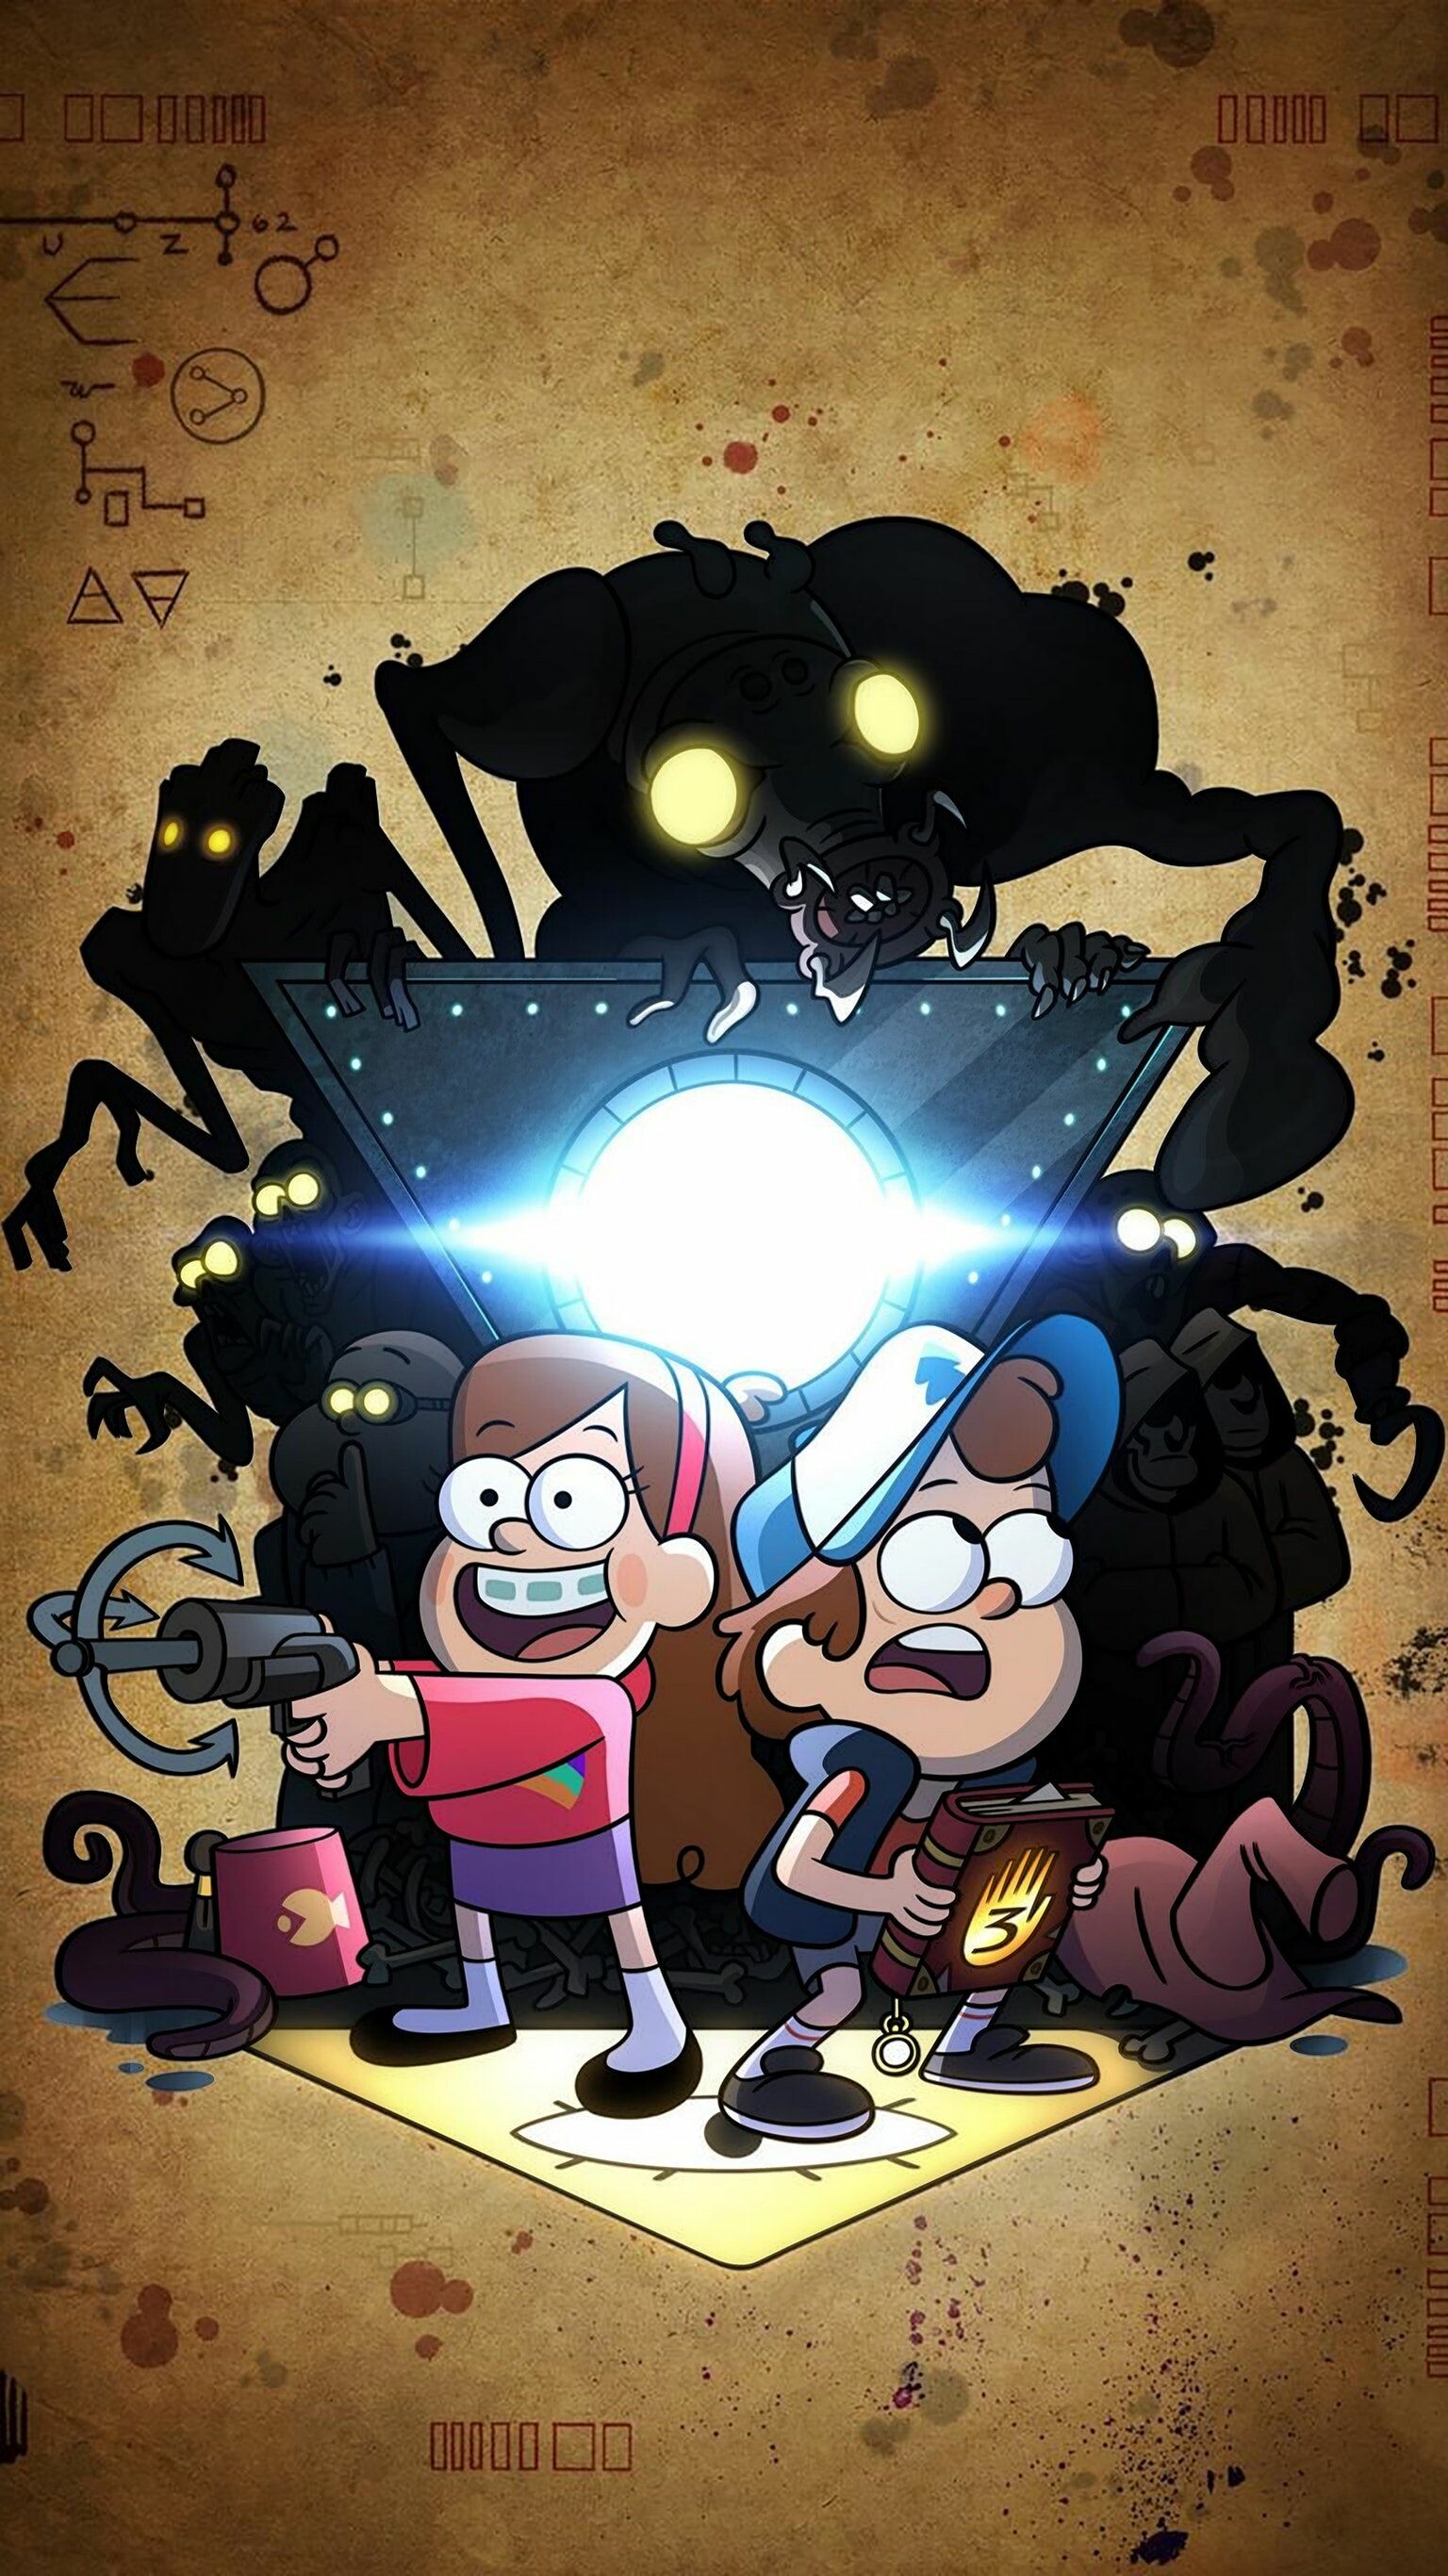 Gravity Falls: The series follows the adventures of Dipper Pines and his twin sister Mabel. 1540x2740 HD Background.